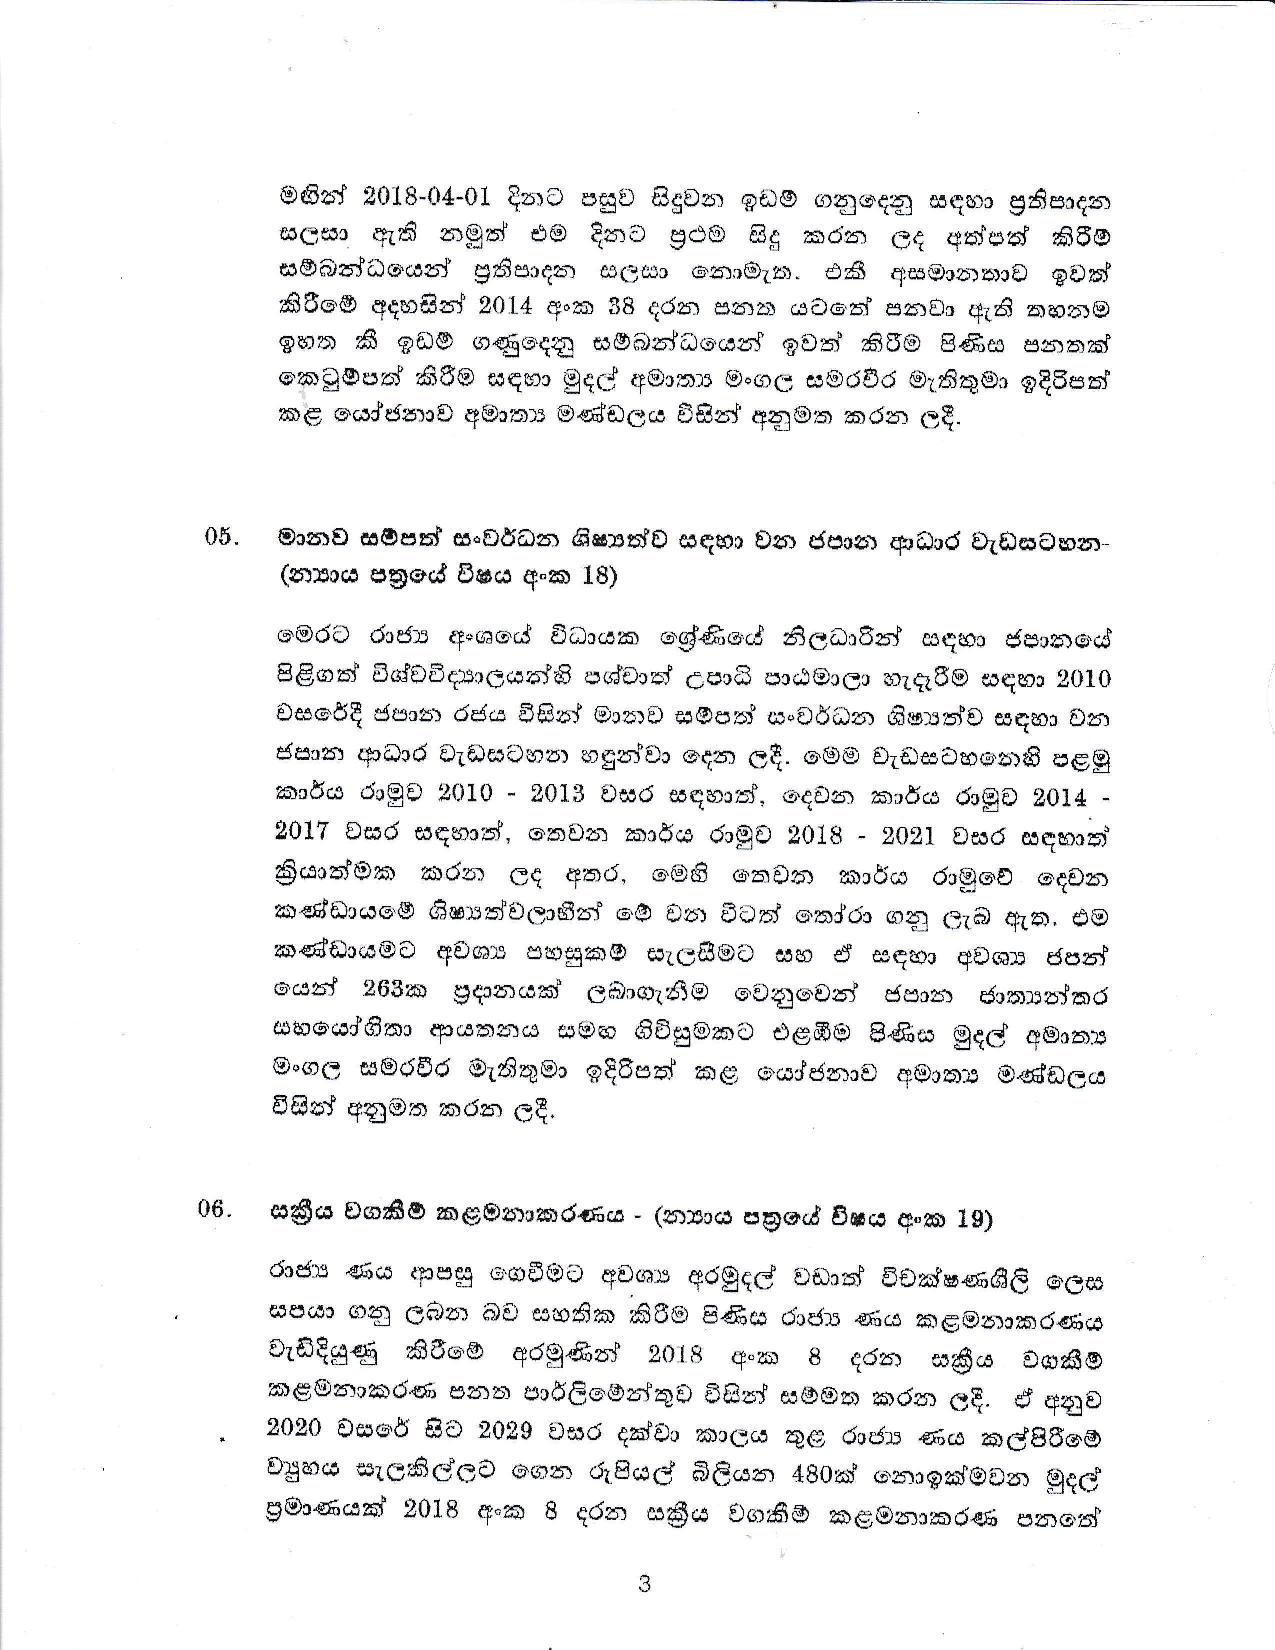 Cabinet Decision on 18.06.2019S page 003